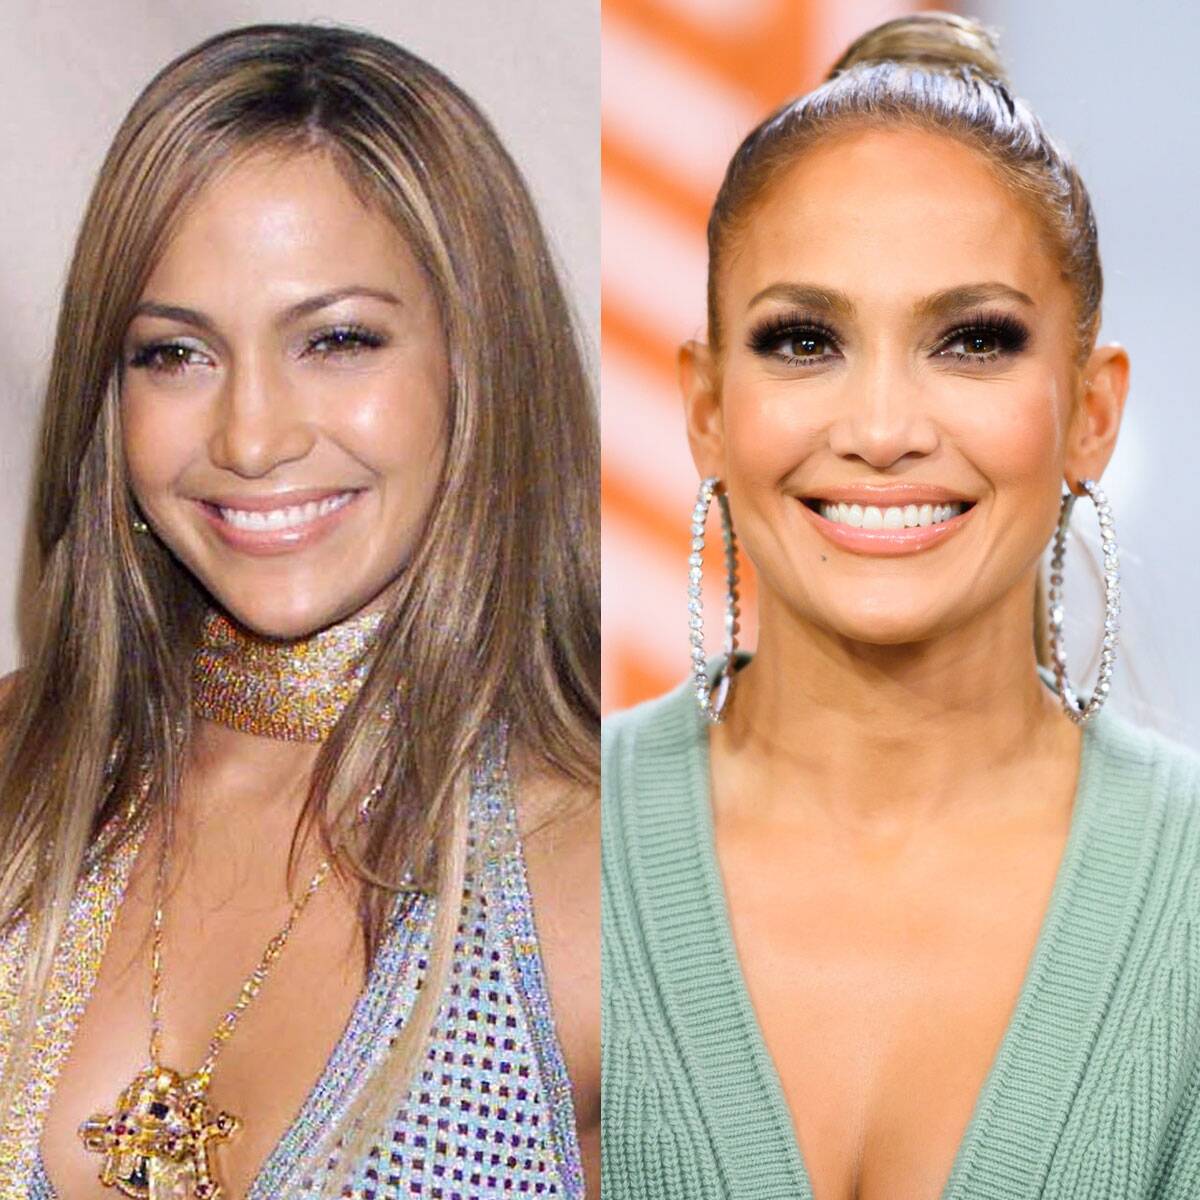 Jennifer Lopez Claps Back at Botox Claims and Also Denies Cosmetic Surgery